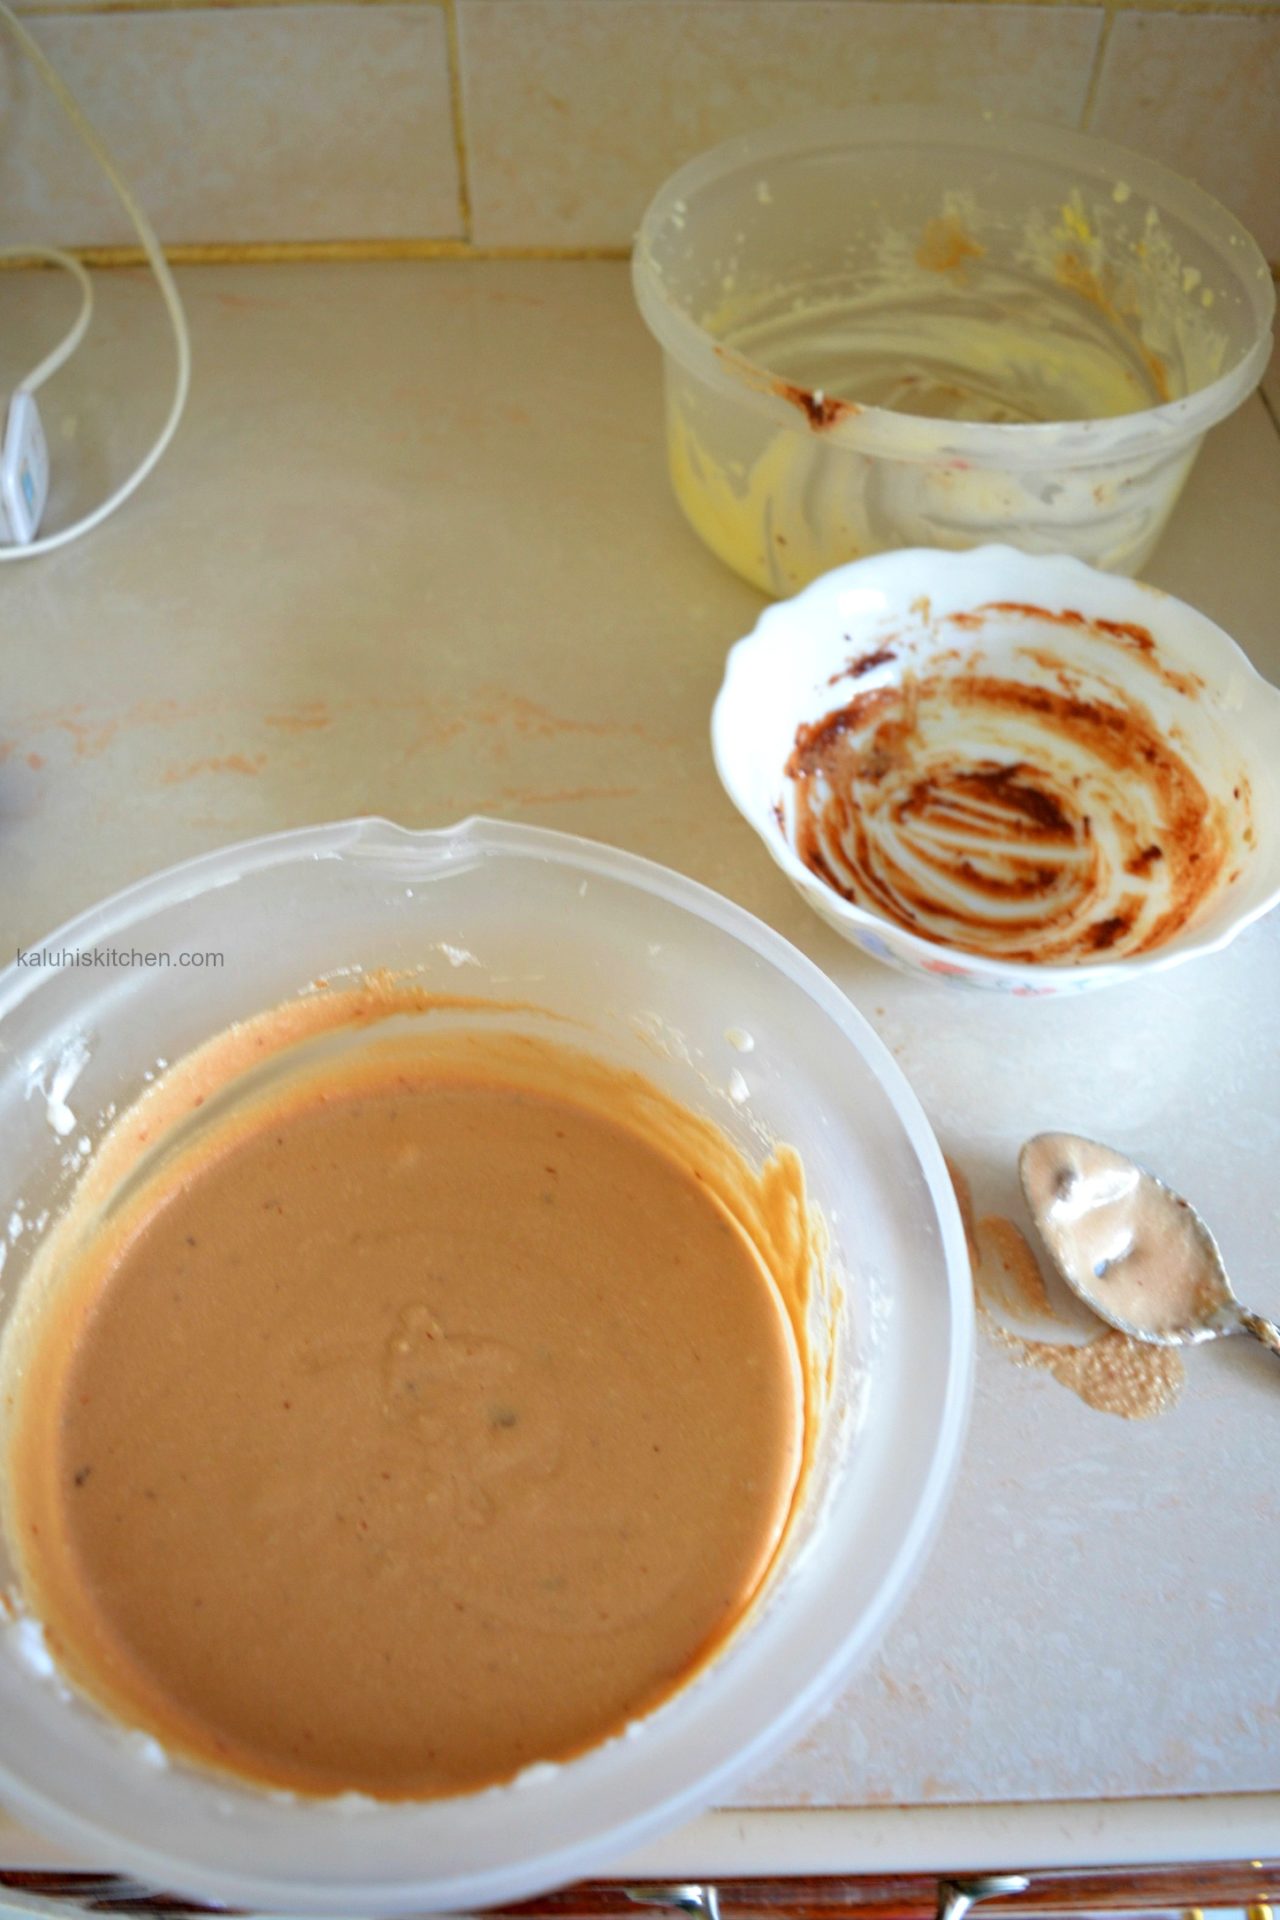 mix the melted chocolate, whipped cream and meringue in one bowl until mixed_kaluhiskitchen.com_best food blog in kenya